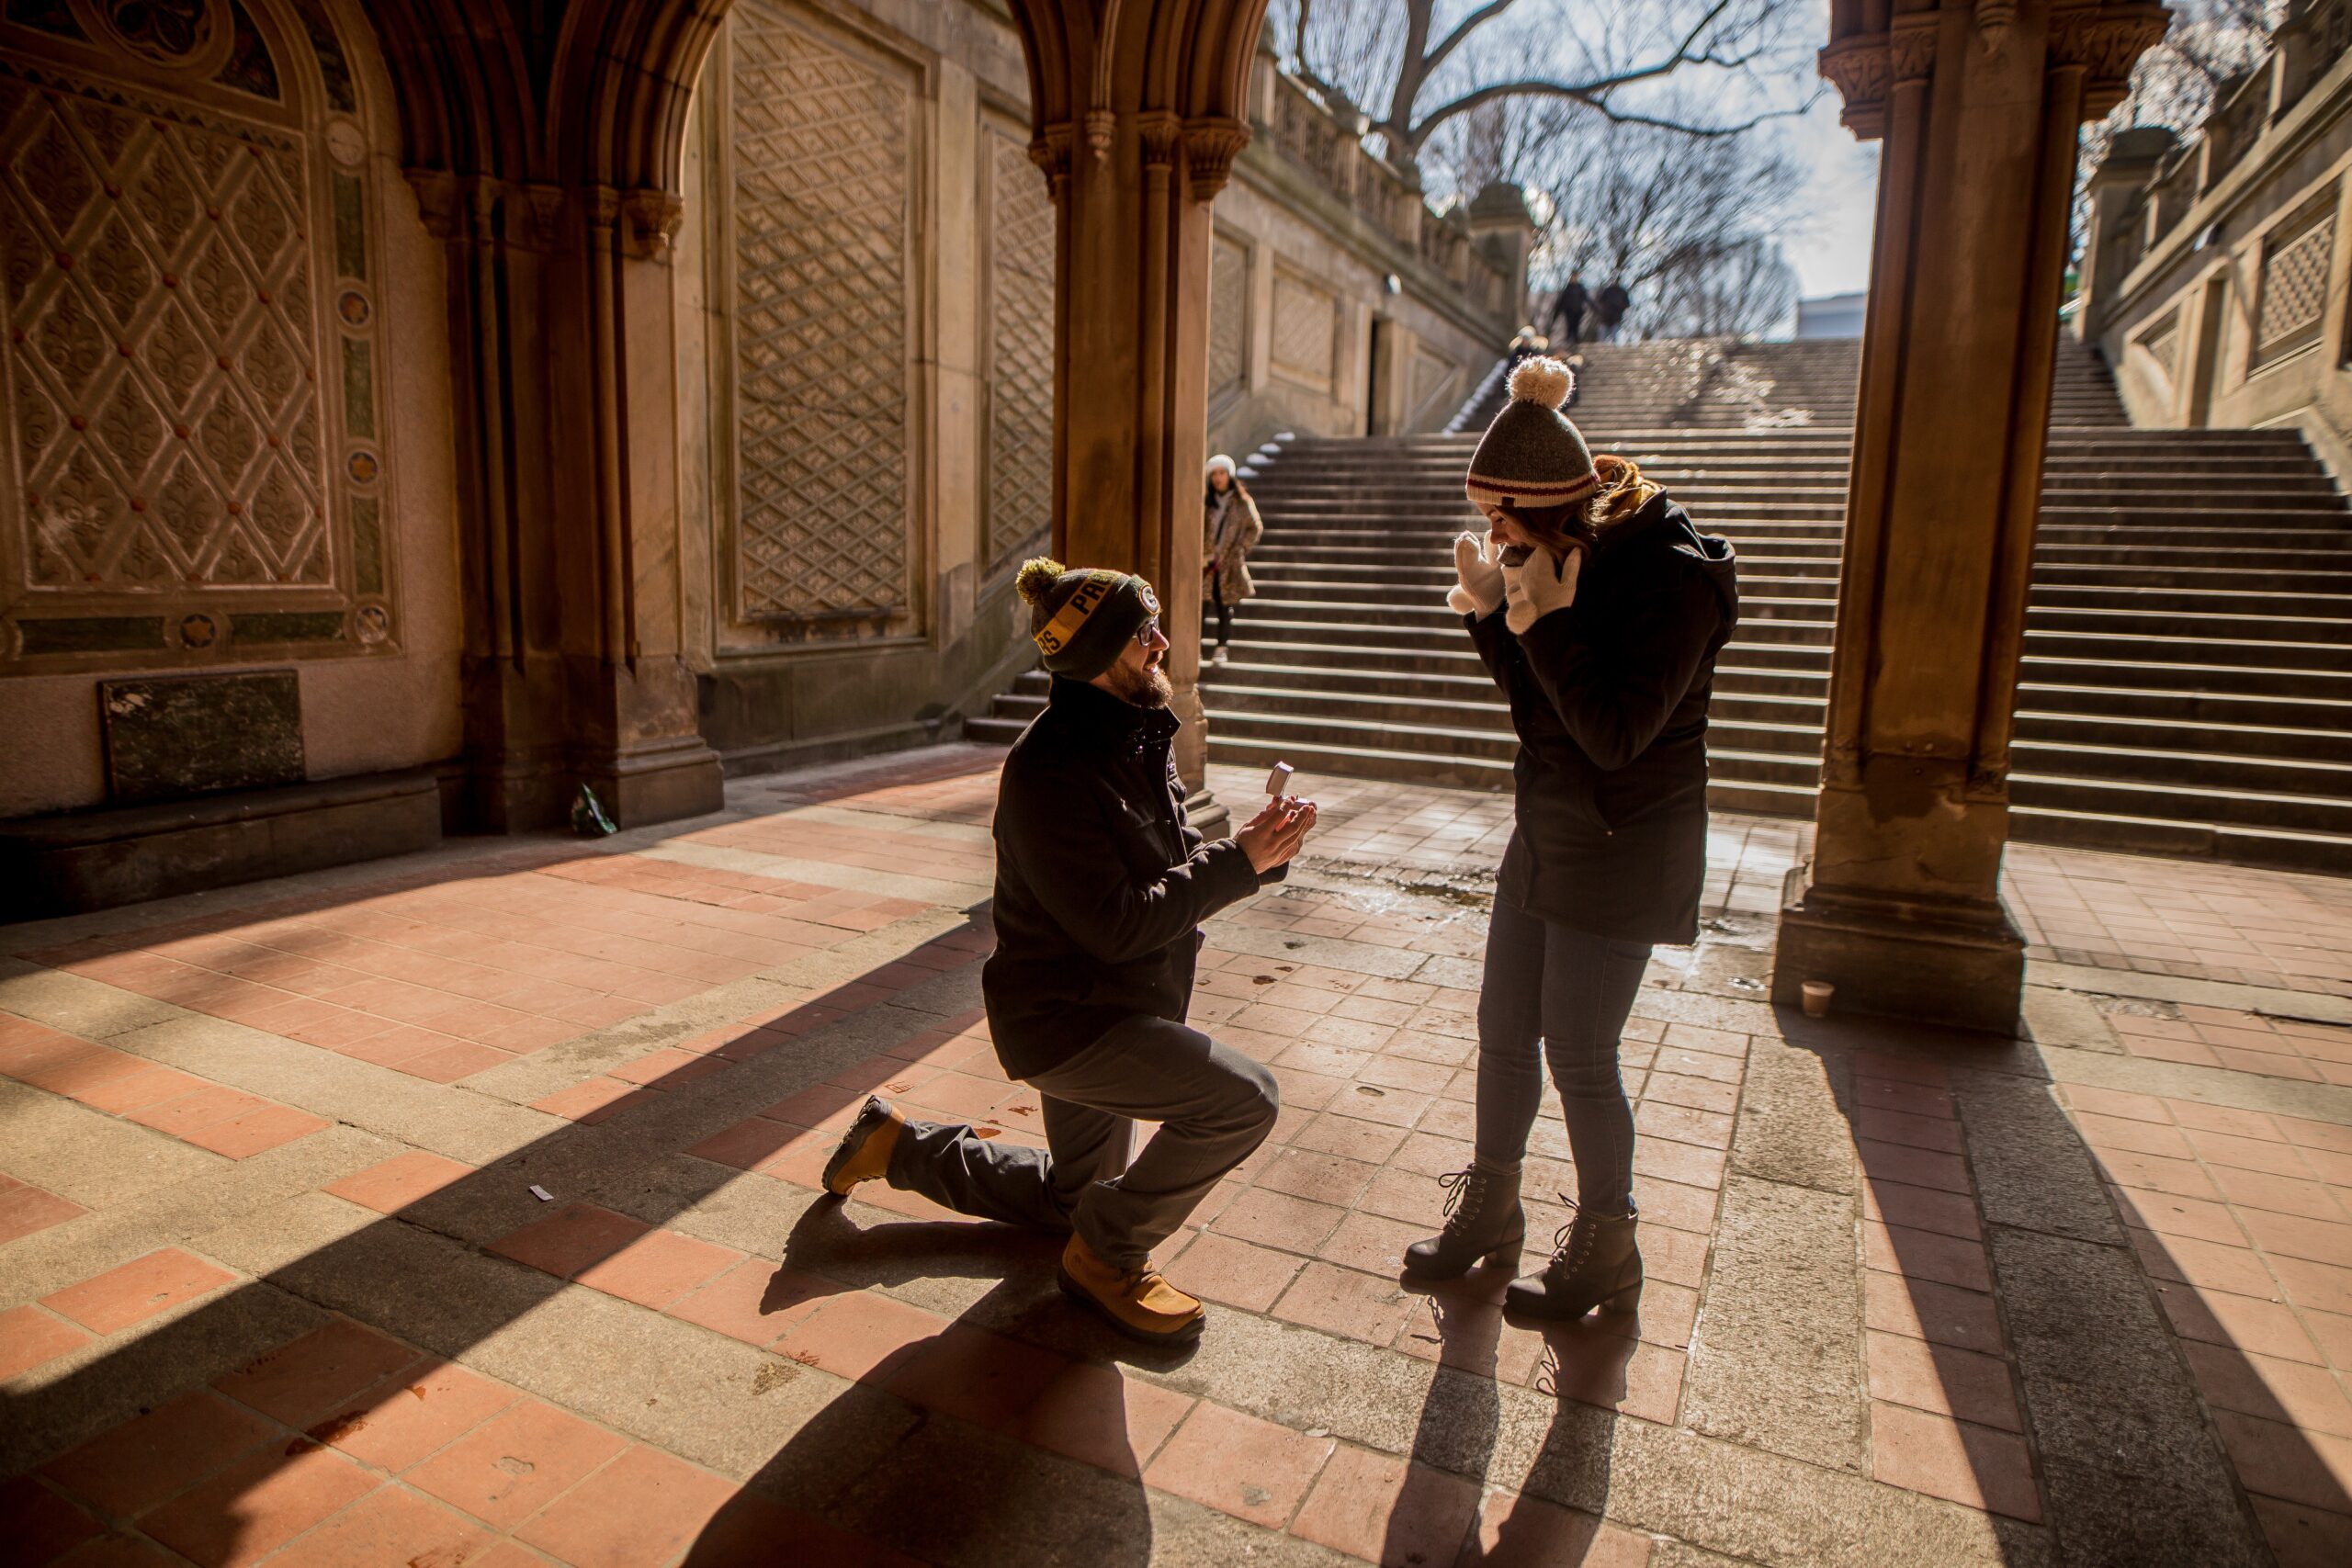 man kneeling before and proposing to a woman